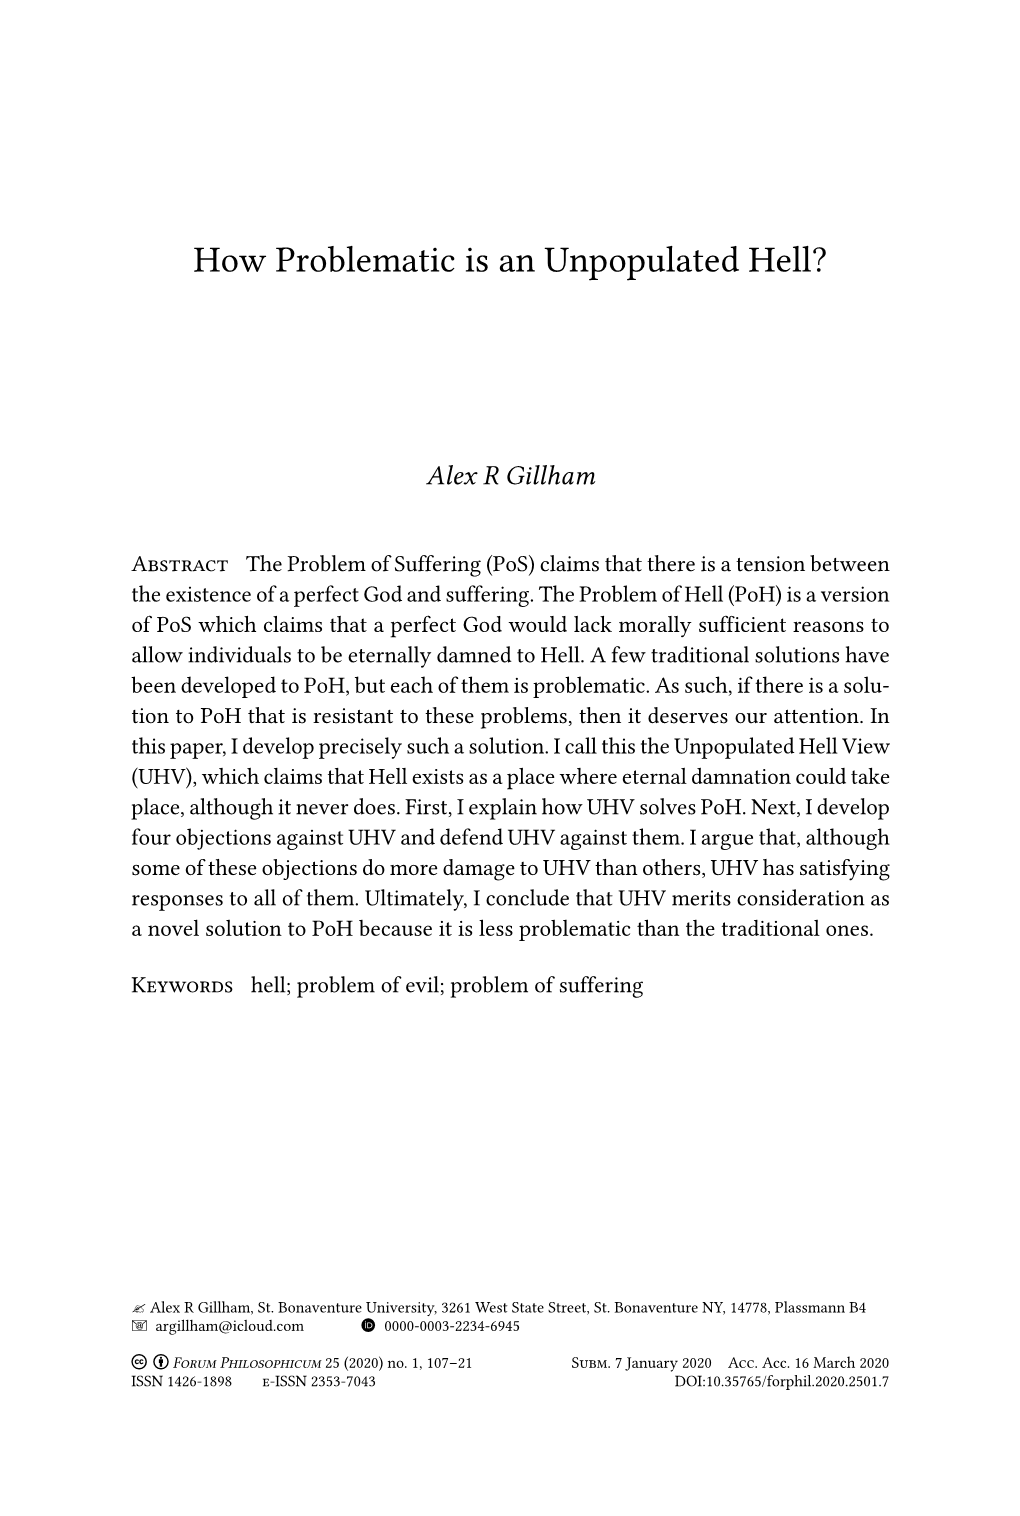 How Problematic Is an Unpopulated Hell?